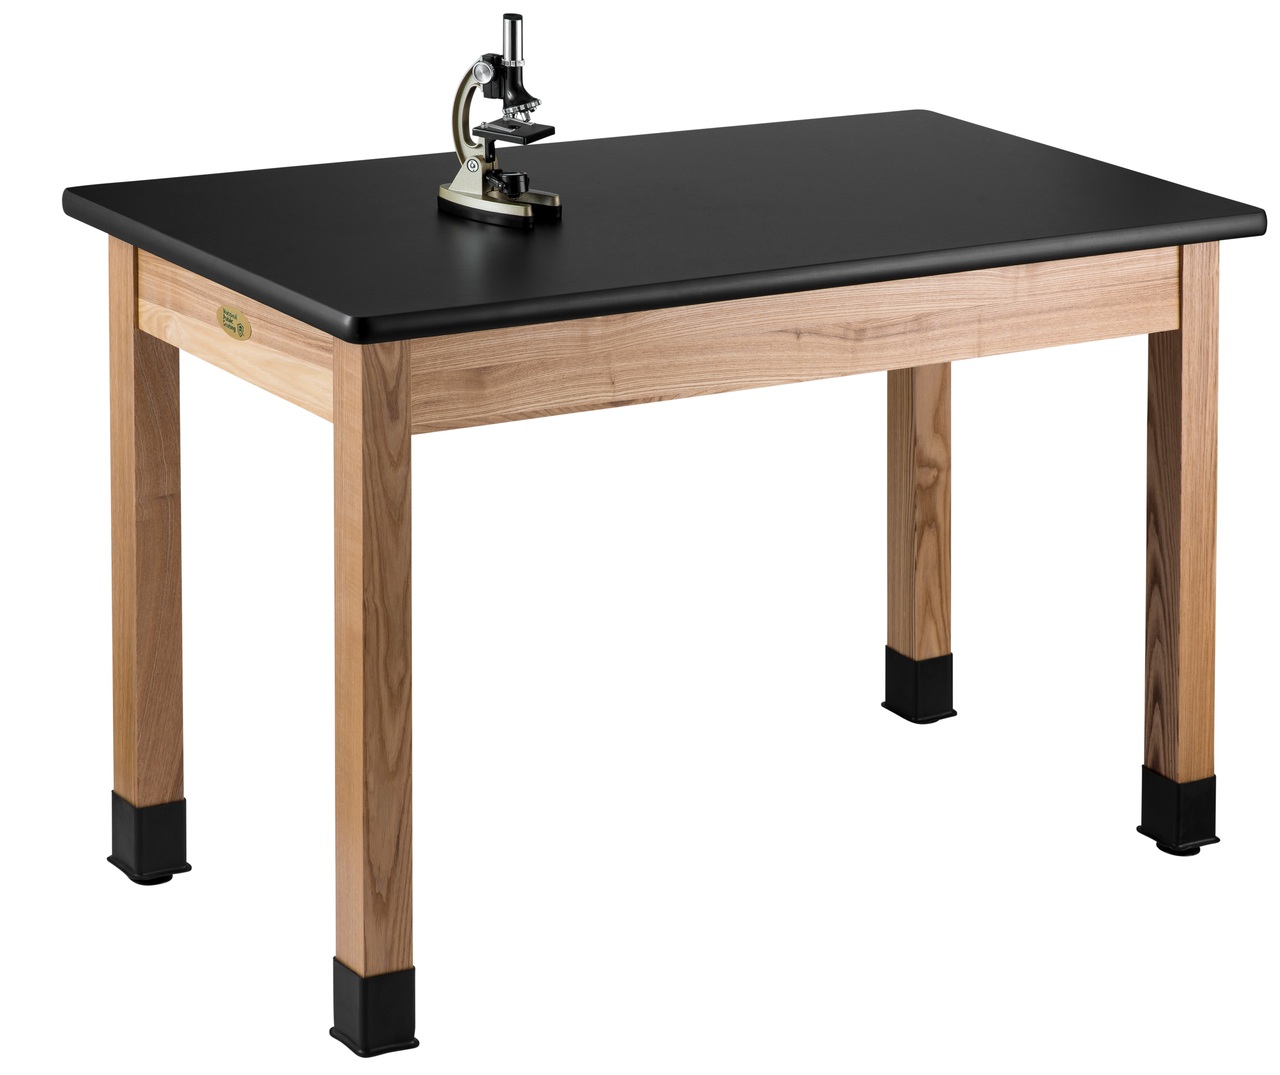 NPS Wood Science Lab Table -  30"x72"x36" -  HPL Top - Black Top and Ash Leg